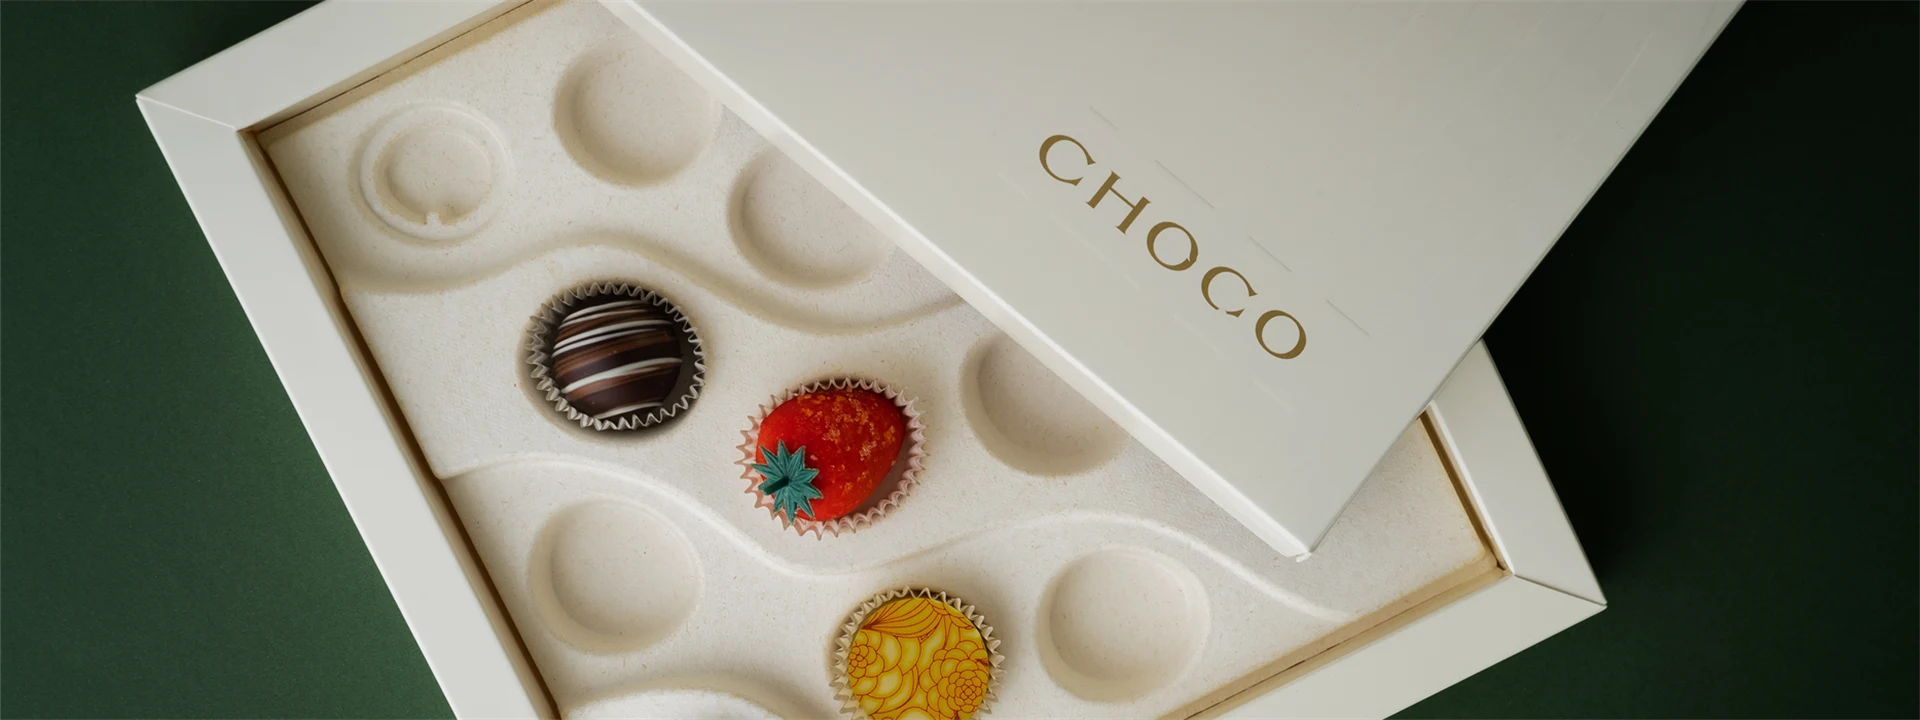 Wood-based insert tray for chocolate packaging